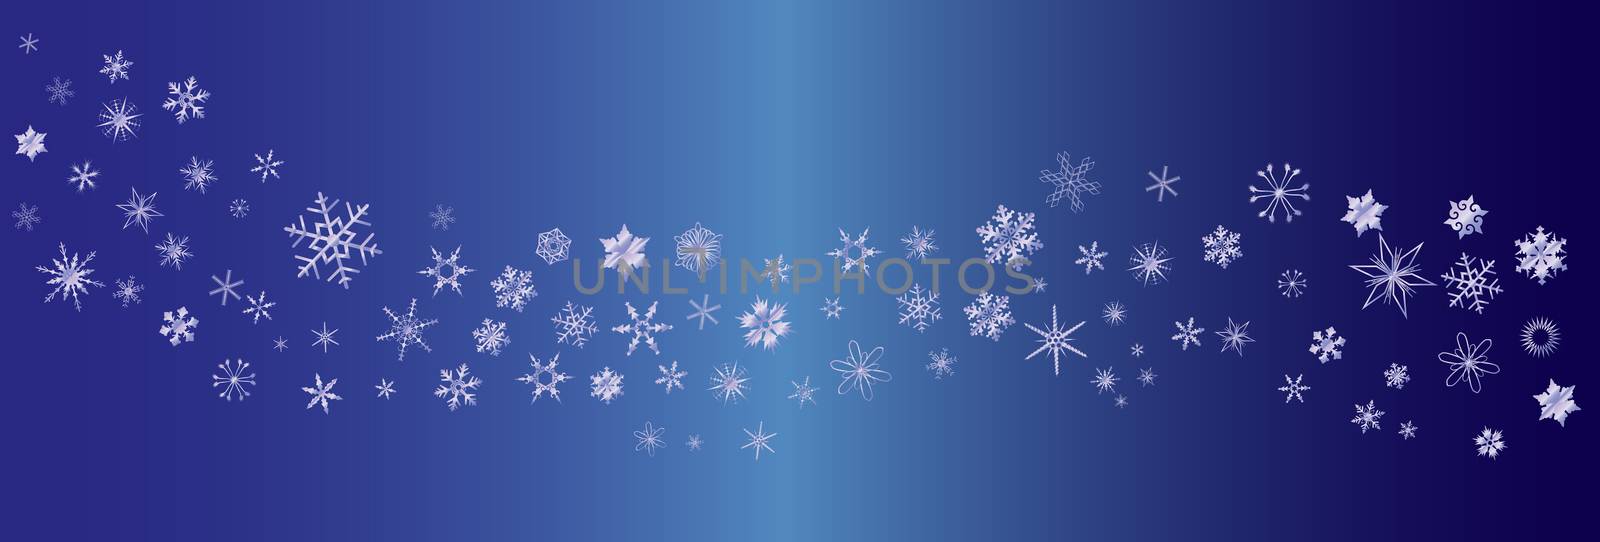 A banner of snowflakes as a blue winter background